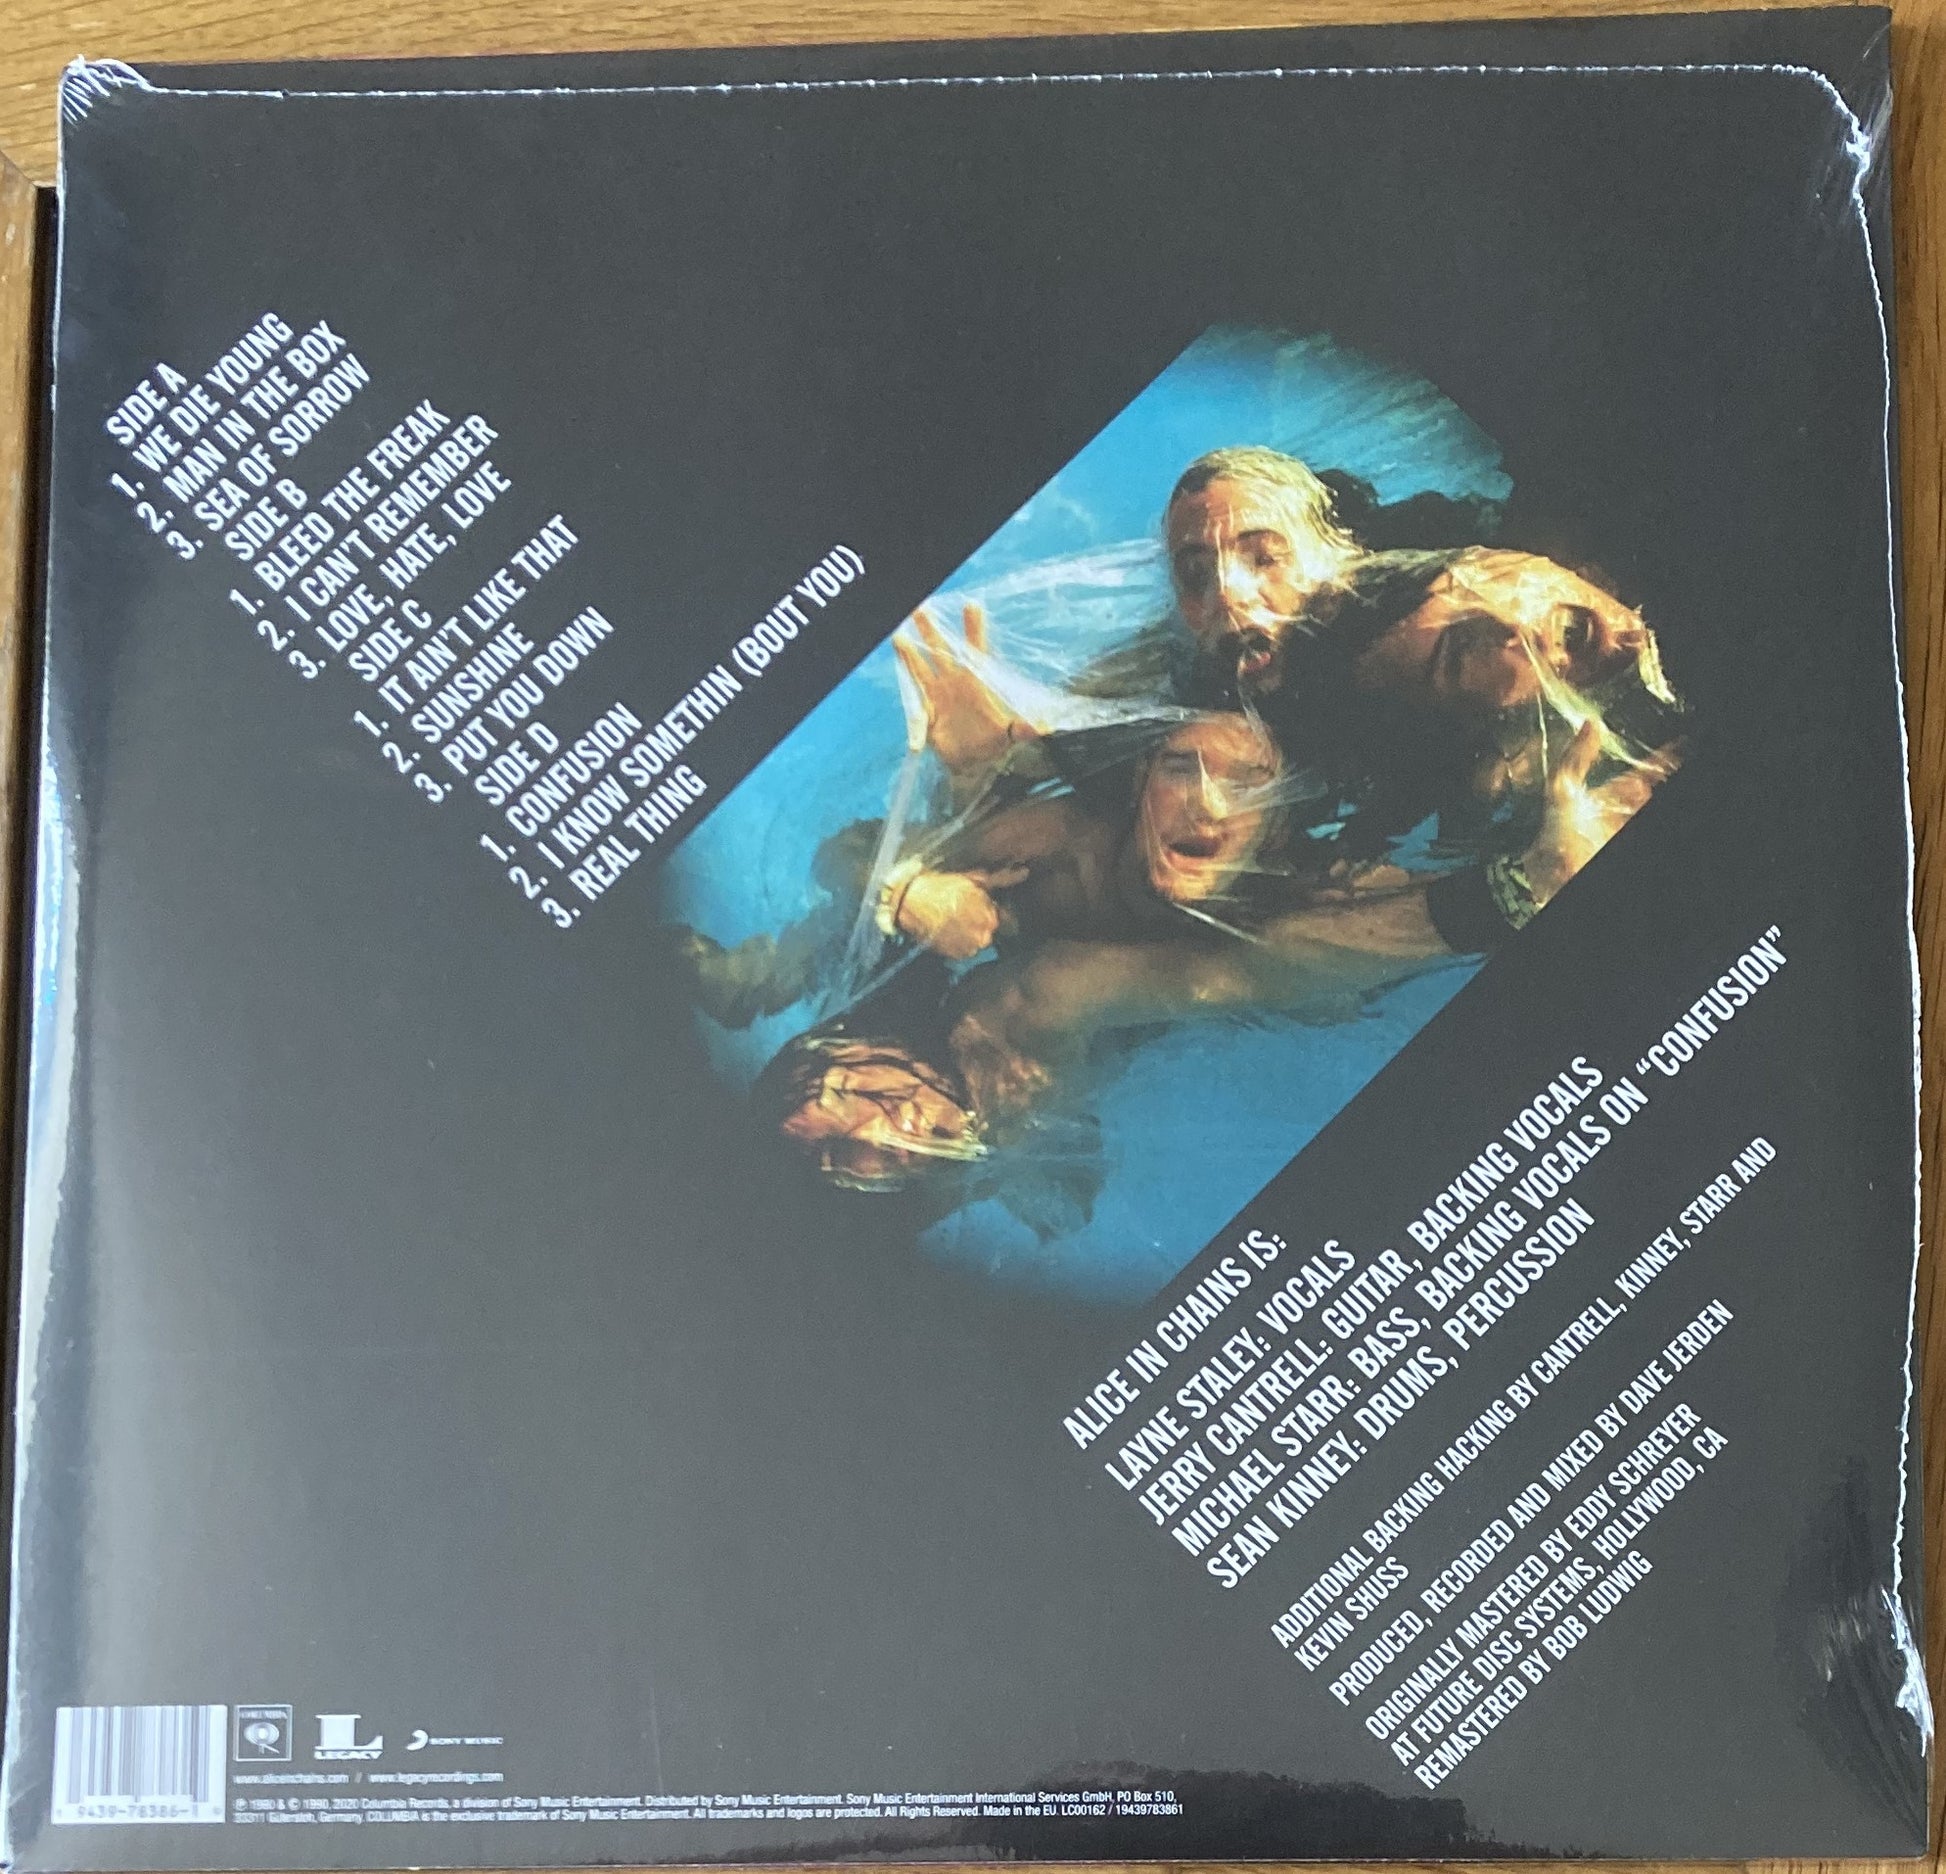 The back of 'Alice in Chains - Facelift' on vinyl